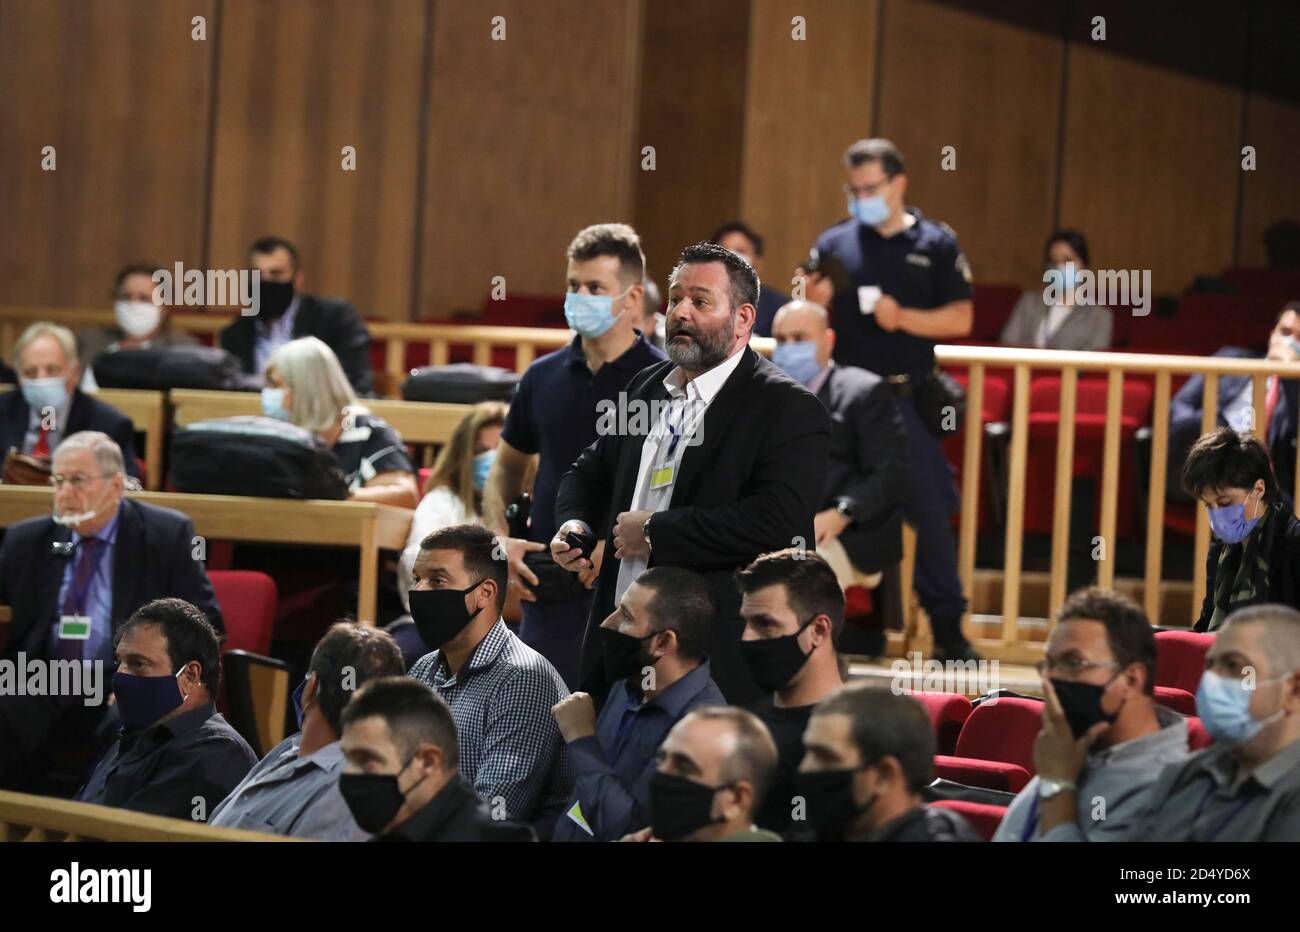 Greek Member of the European Parliament and a former member of Golden Dawn  Ioannis Lagos attends the trial of leaders and members of the Golden Dawn  in a court in Athens, Greece,